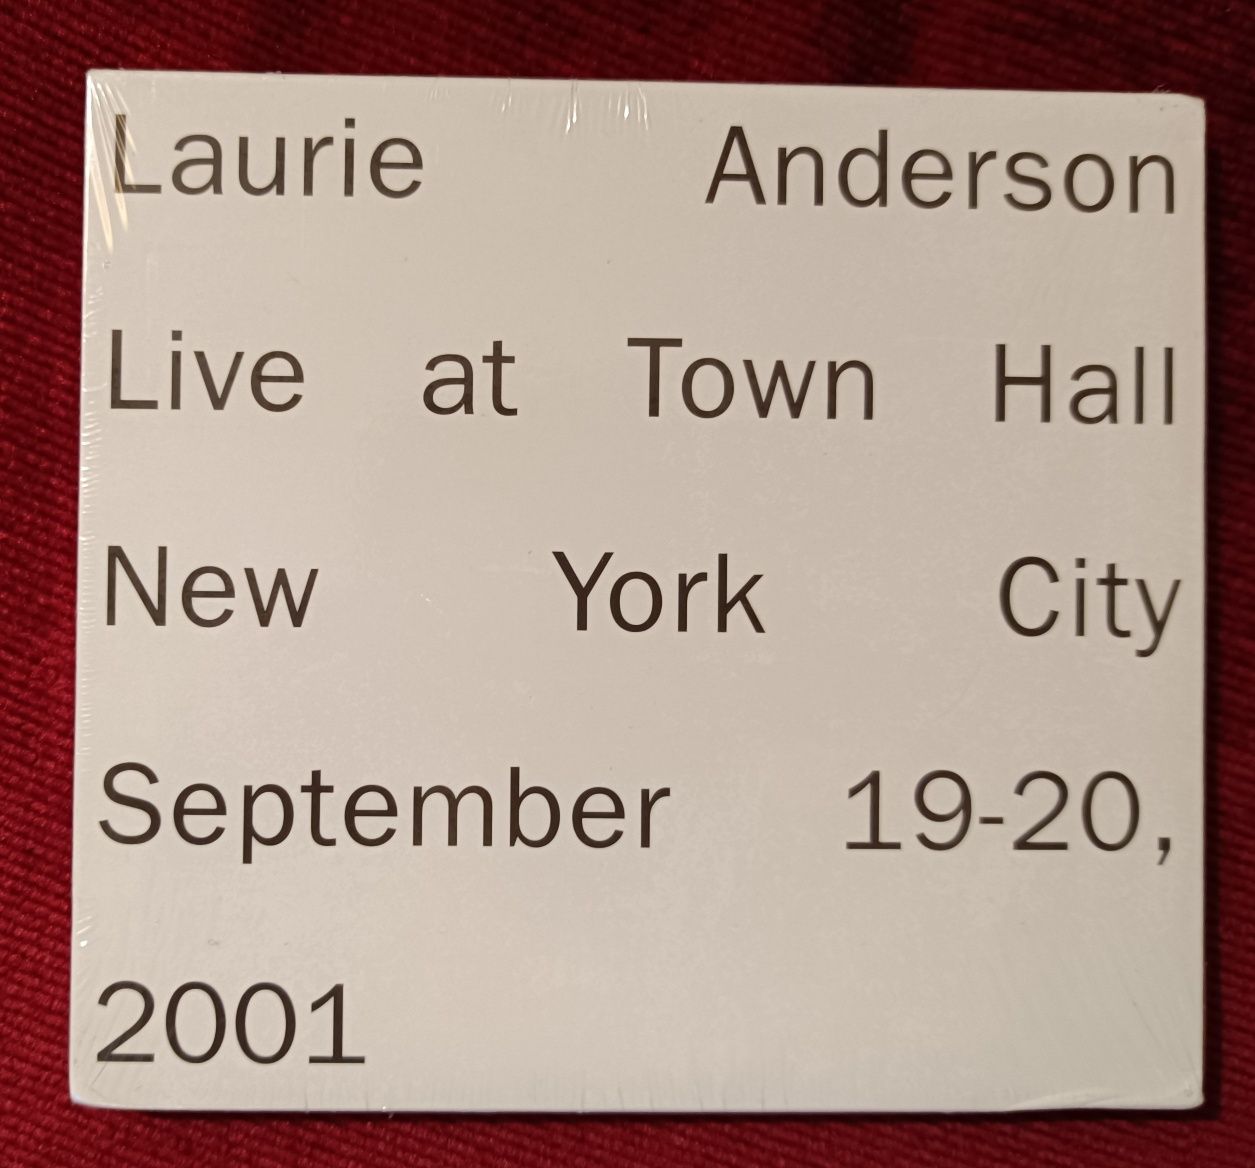 Laurie Anderson "Live at Town Hall NYC 2001" 2CDs